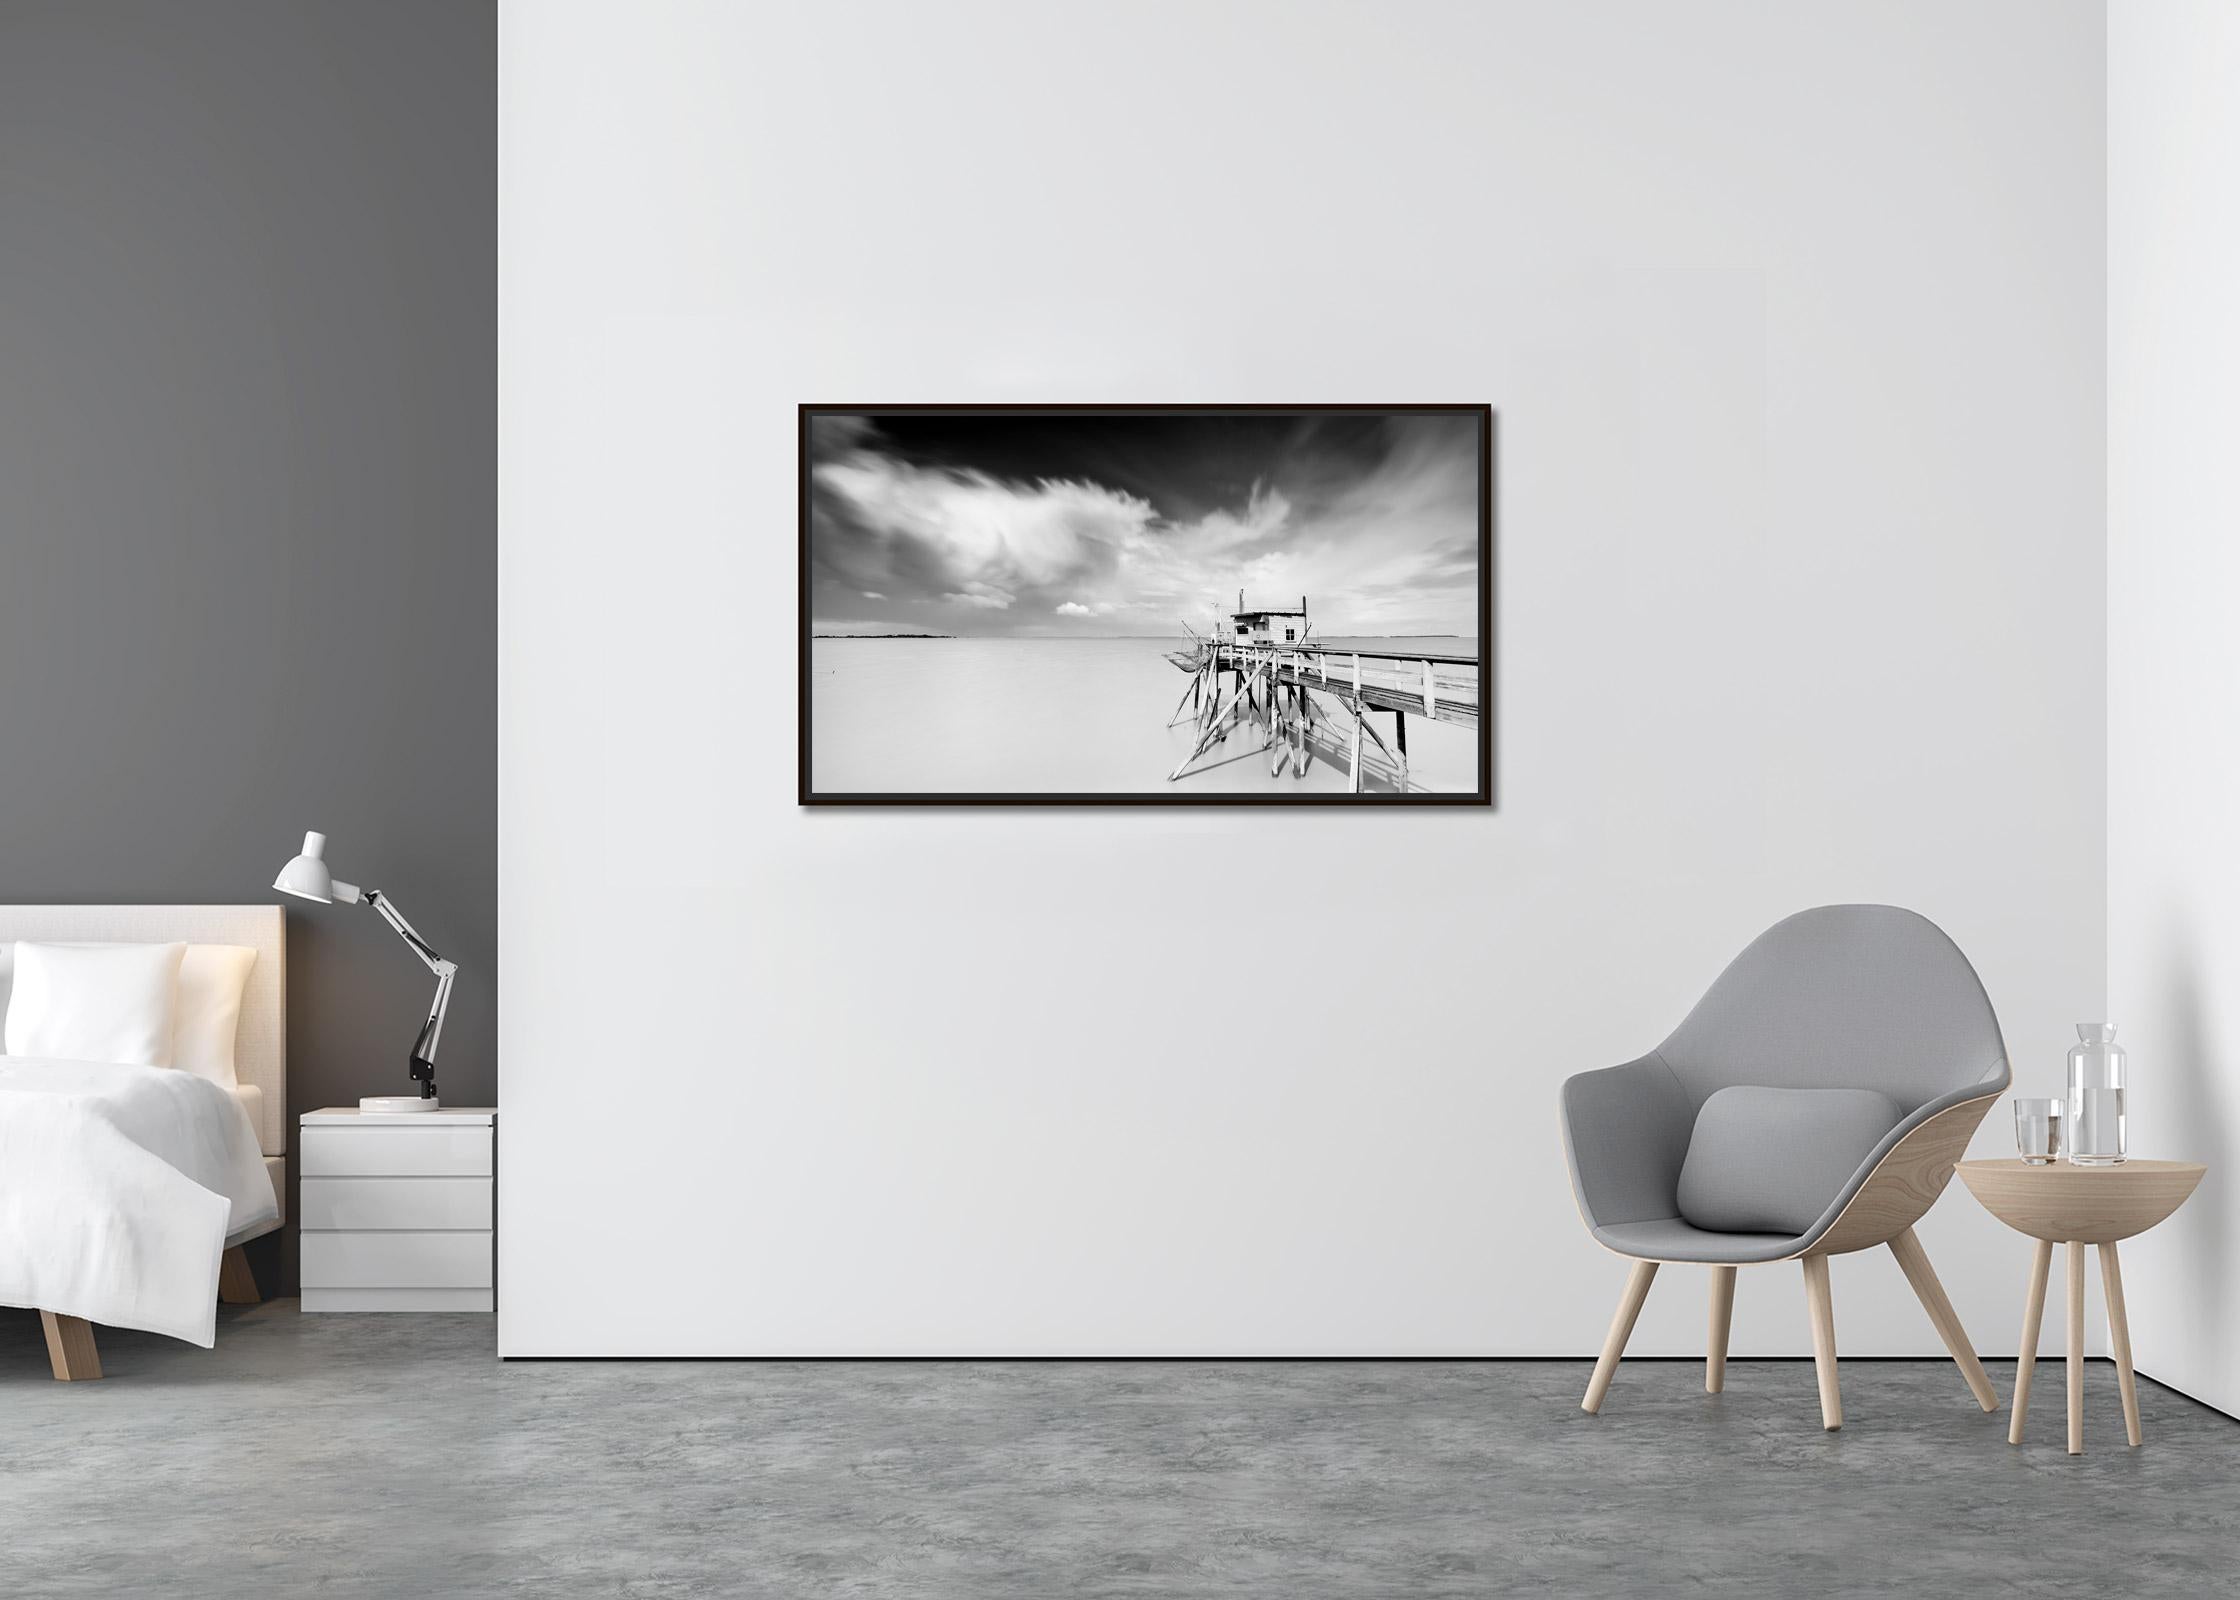 Fishing Hut on Stilts, Panorama, giant Clouds, fine art landscape photography - Contemporary Photograph by Gerald Berghammer